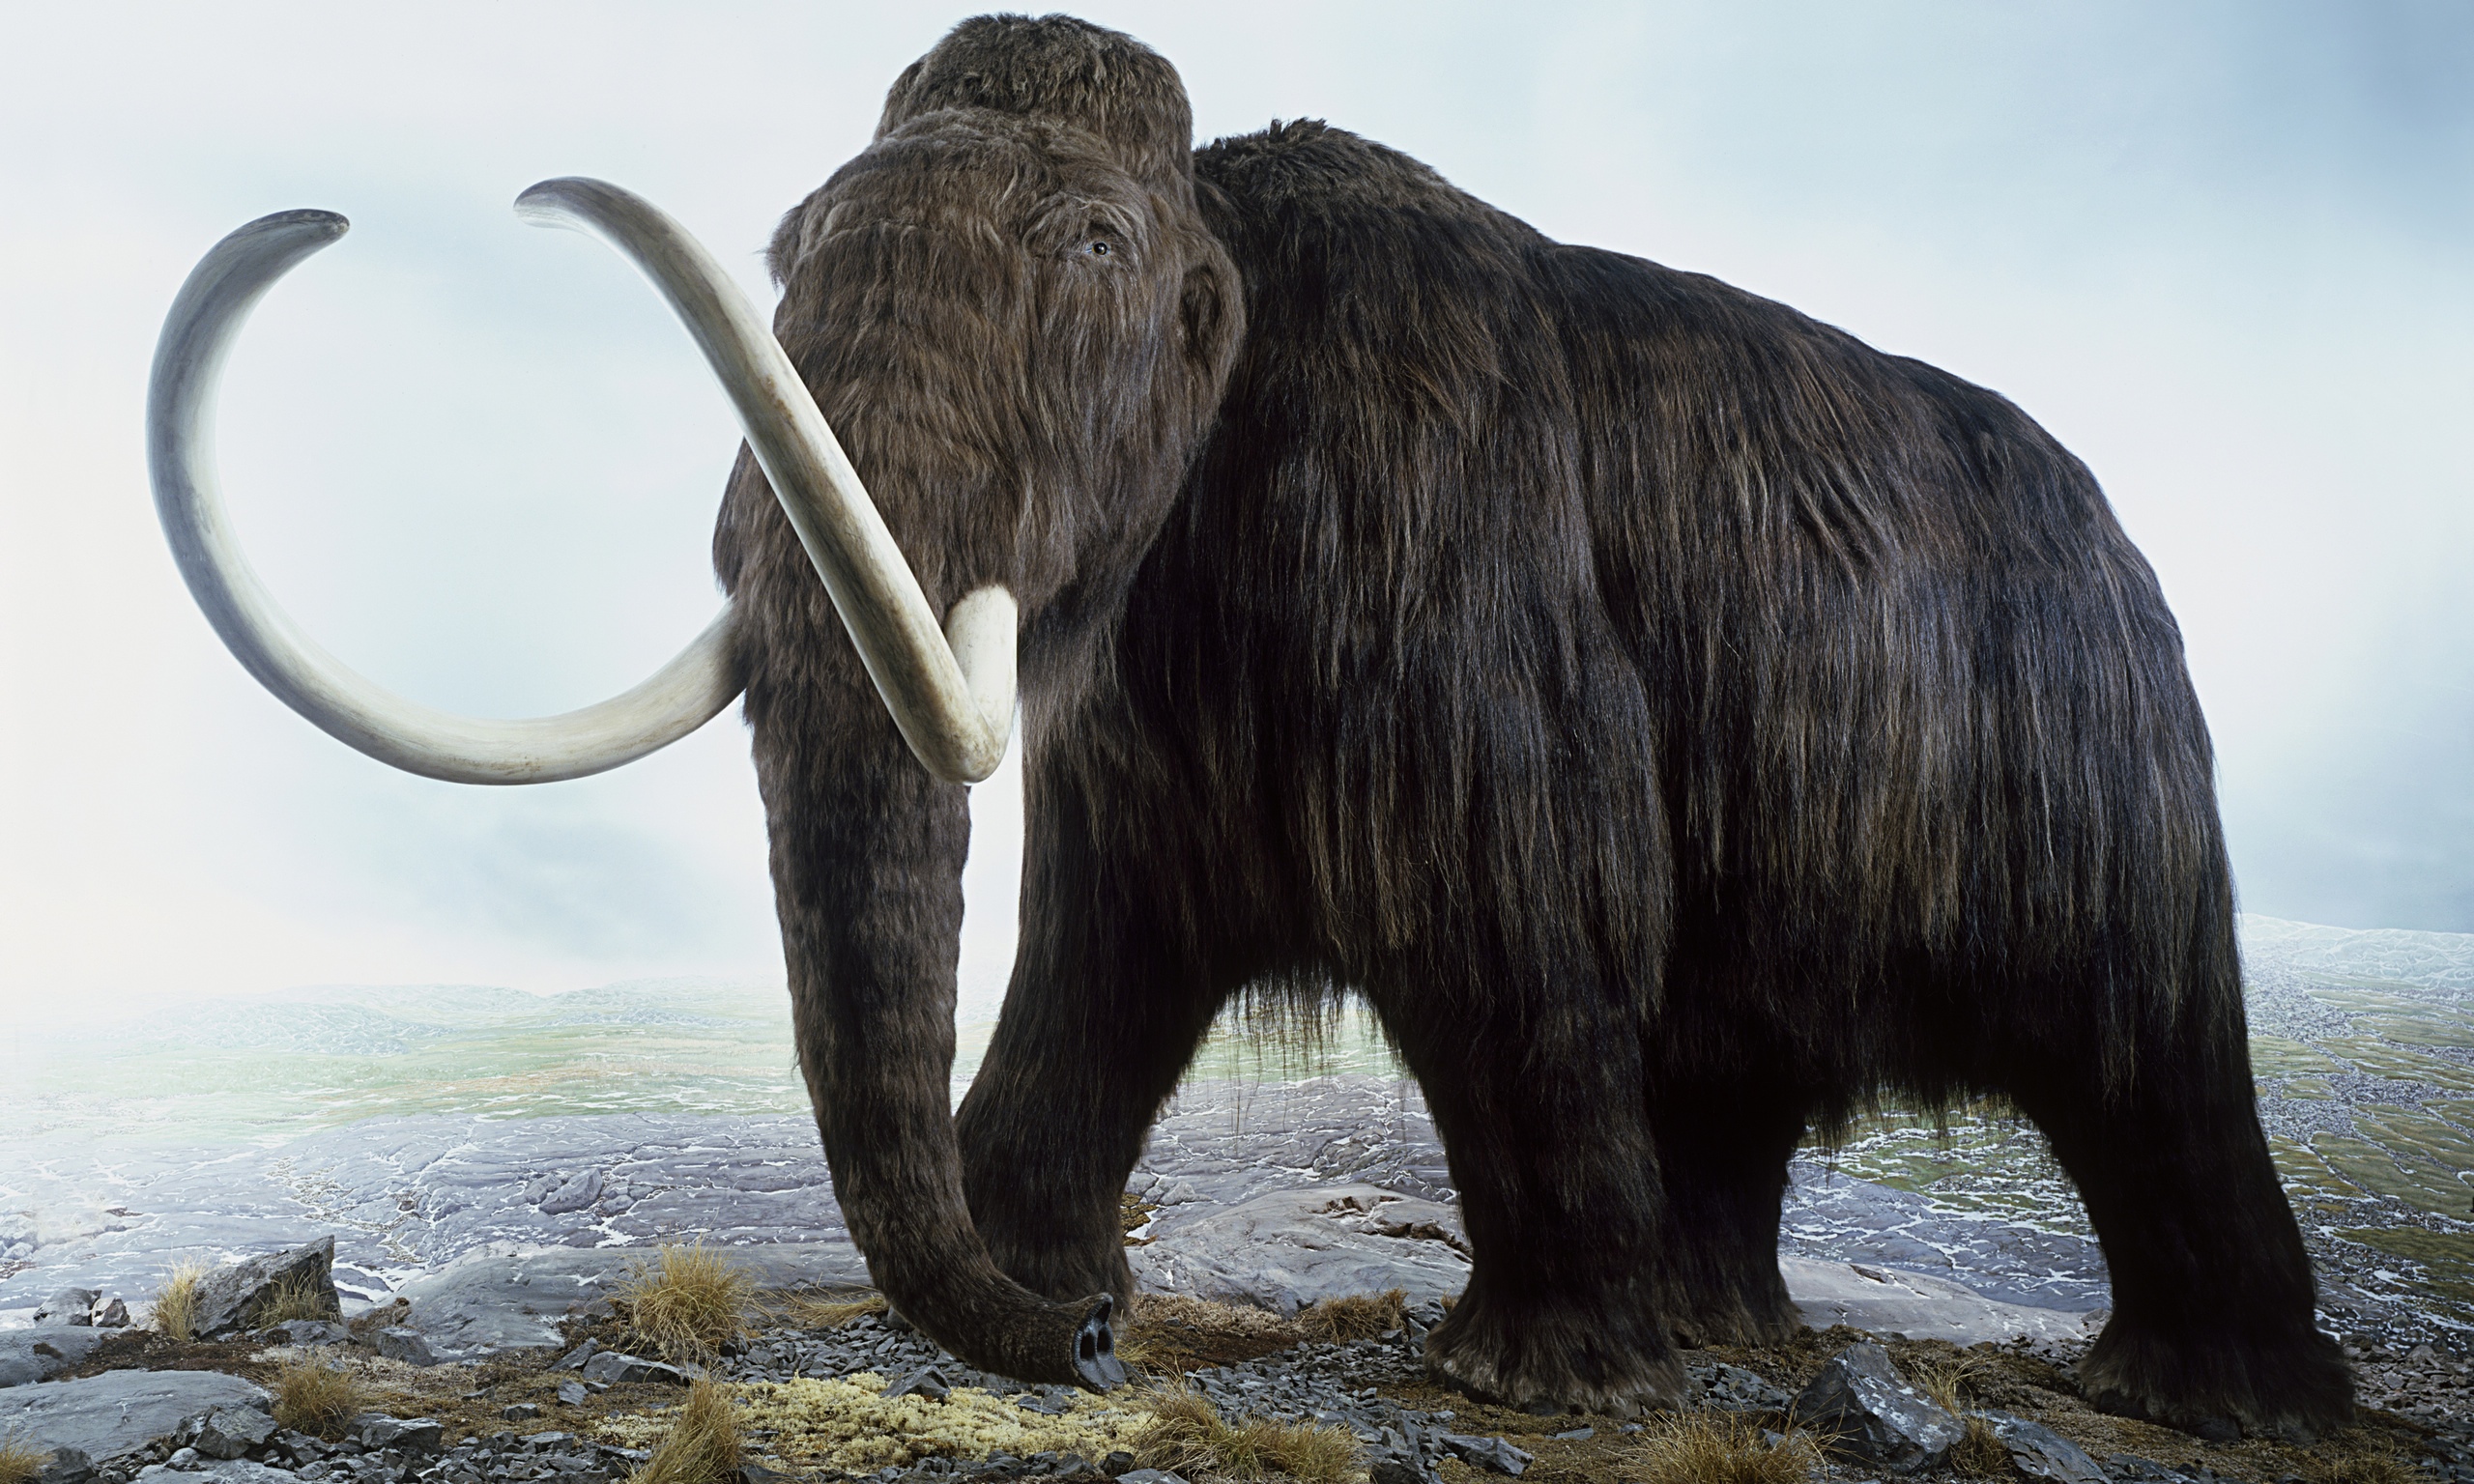 Woolly-mammoth-015.jpg Images - Frompo